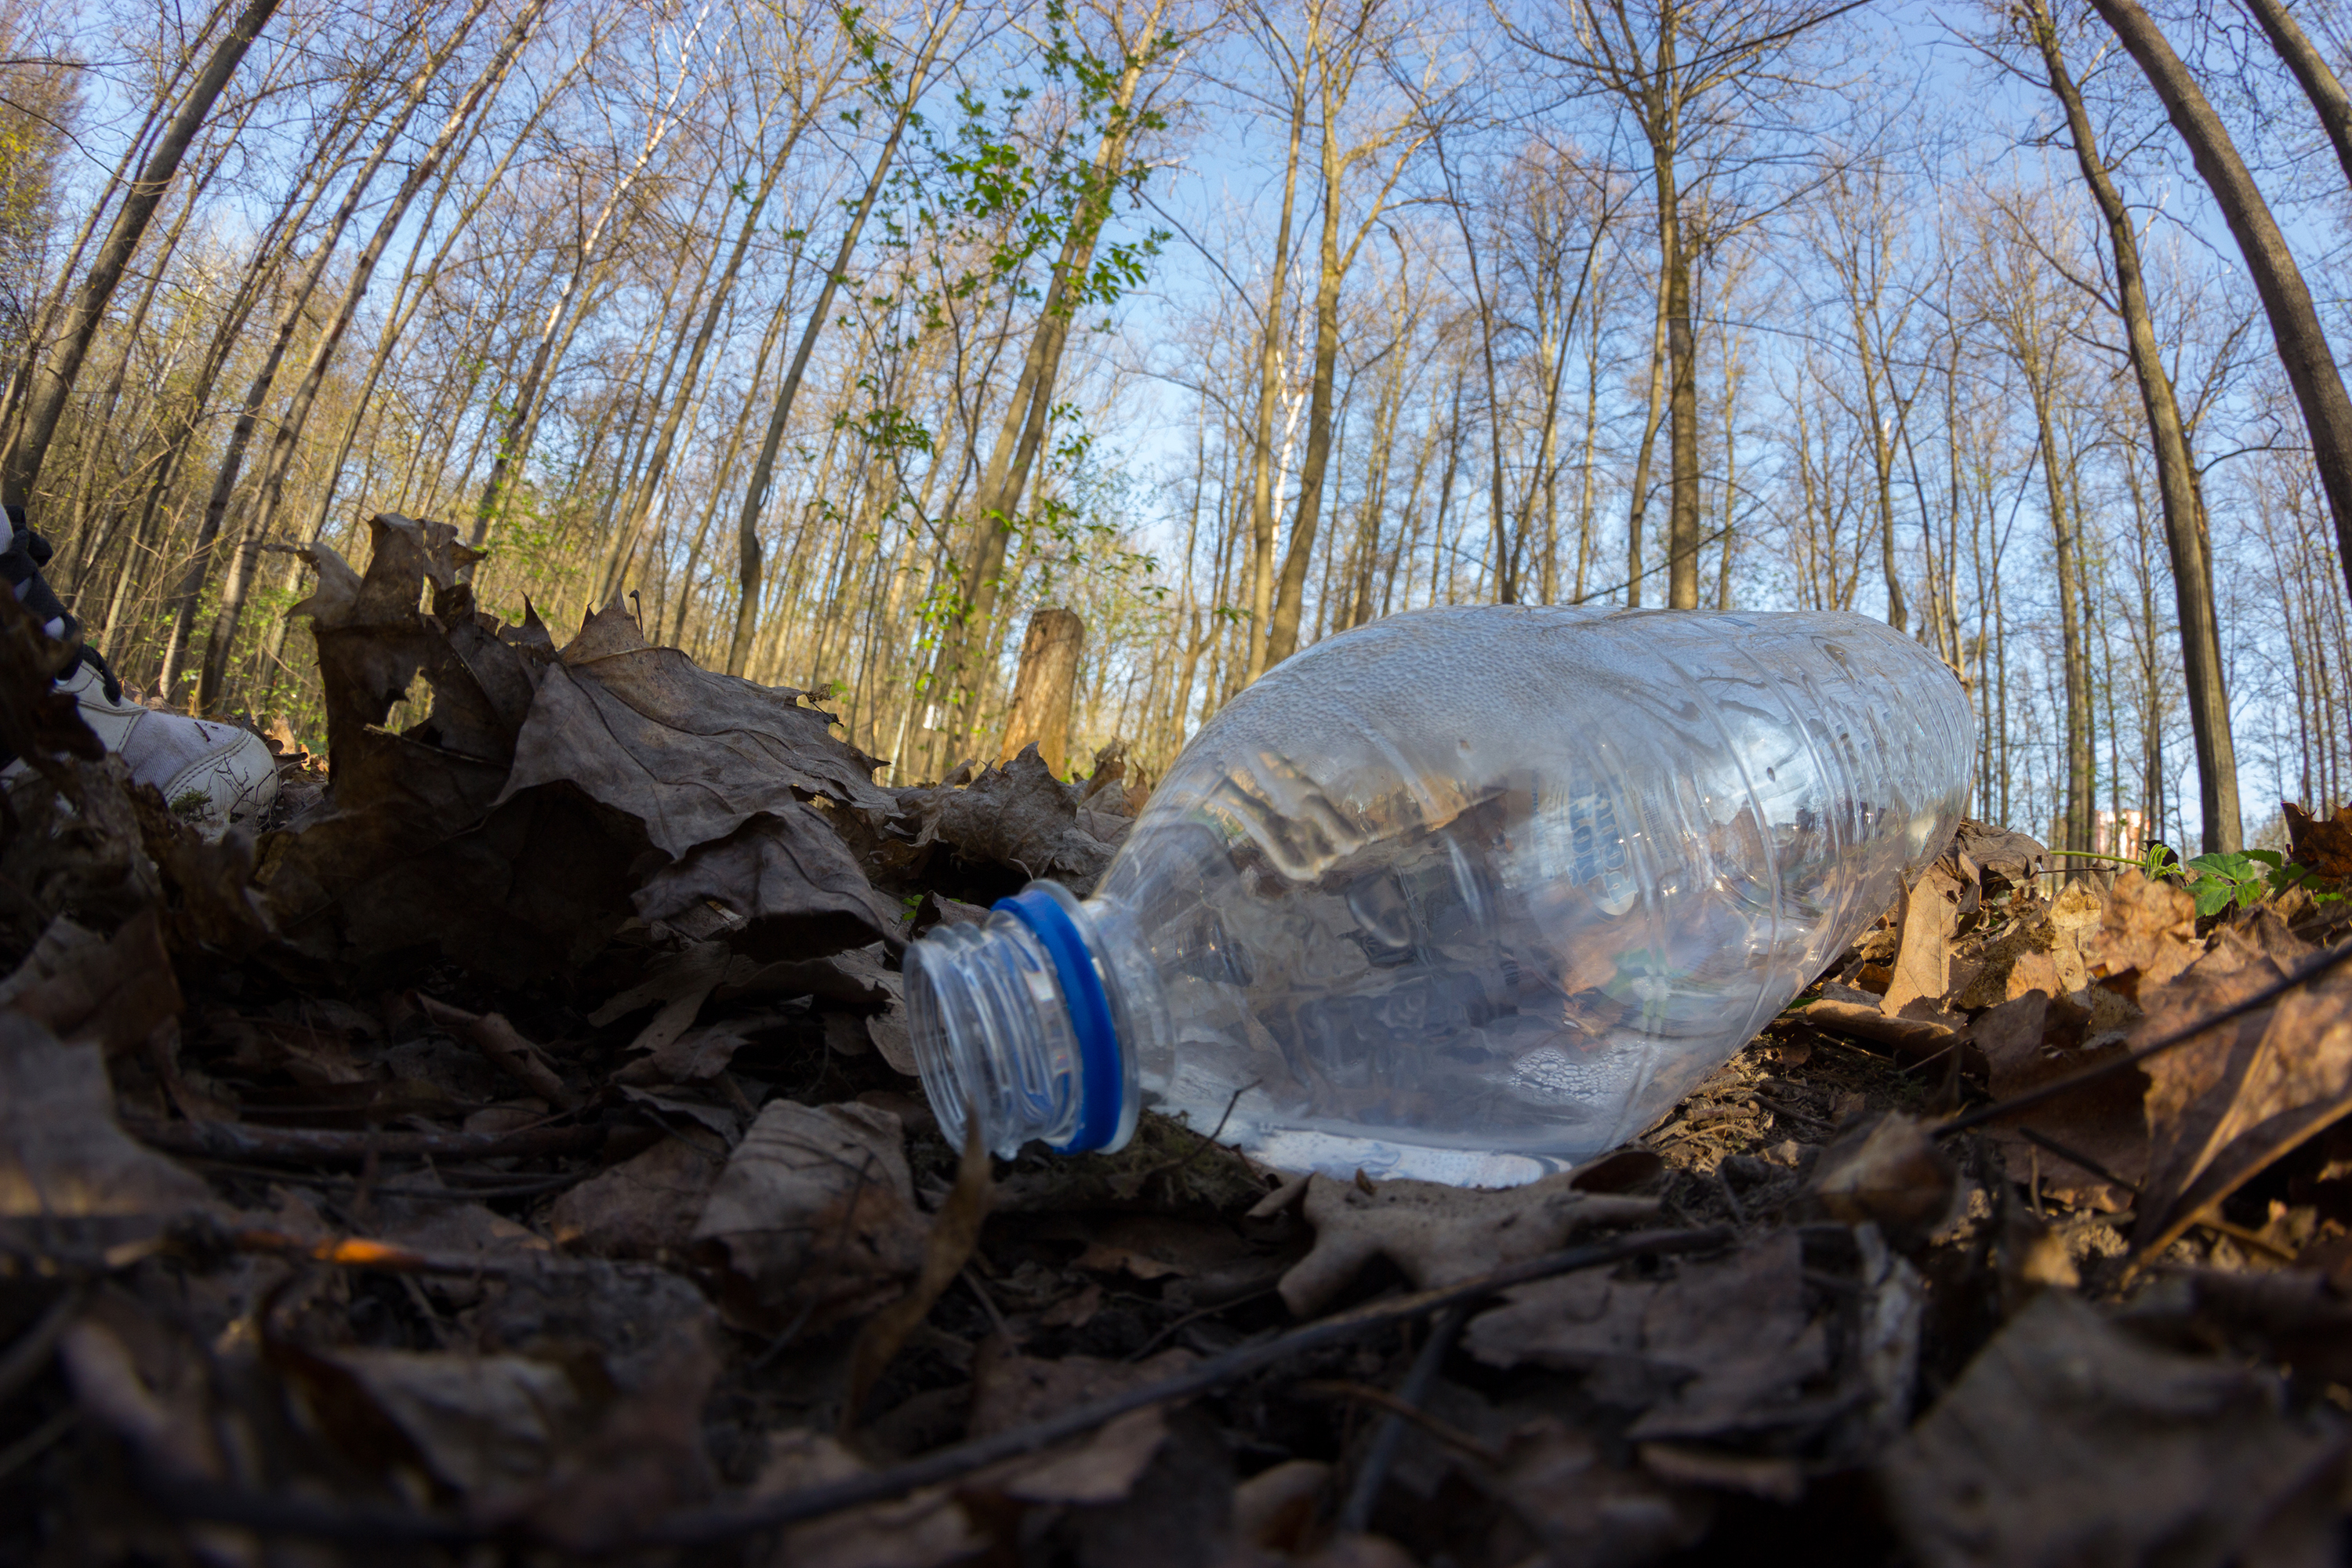 A carelessly throw away plastic bottle nestled in the foliage litters a forest path